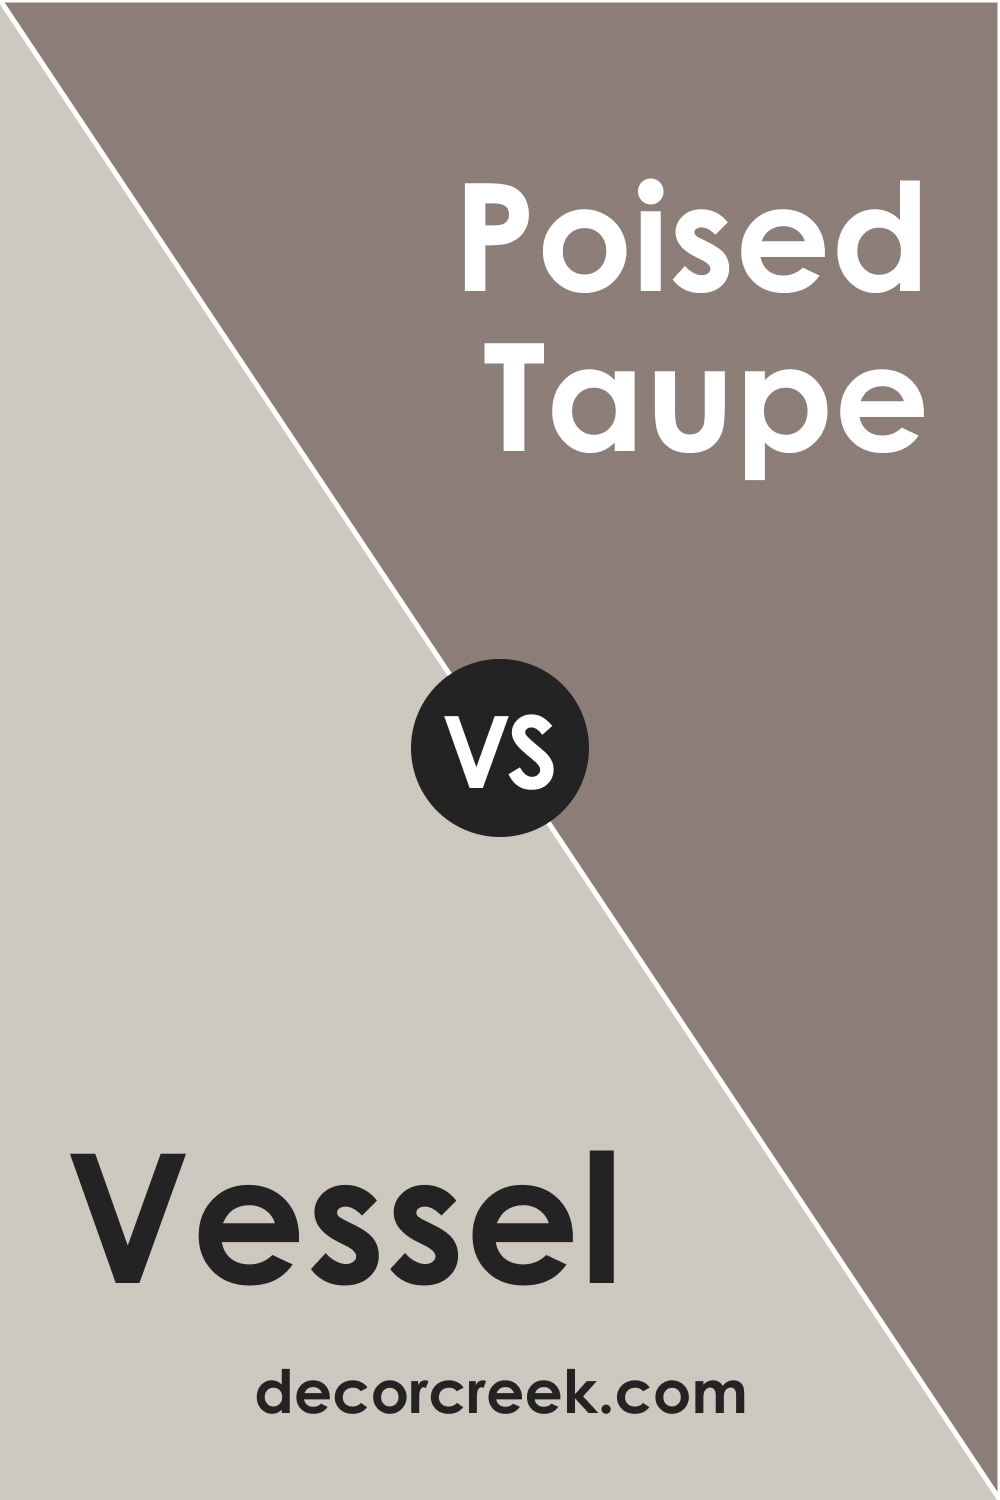 SW 9547 Vessel vs. SW 6039 Poised Taupe